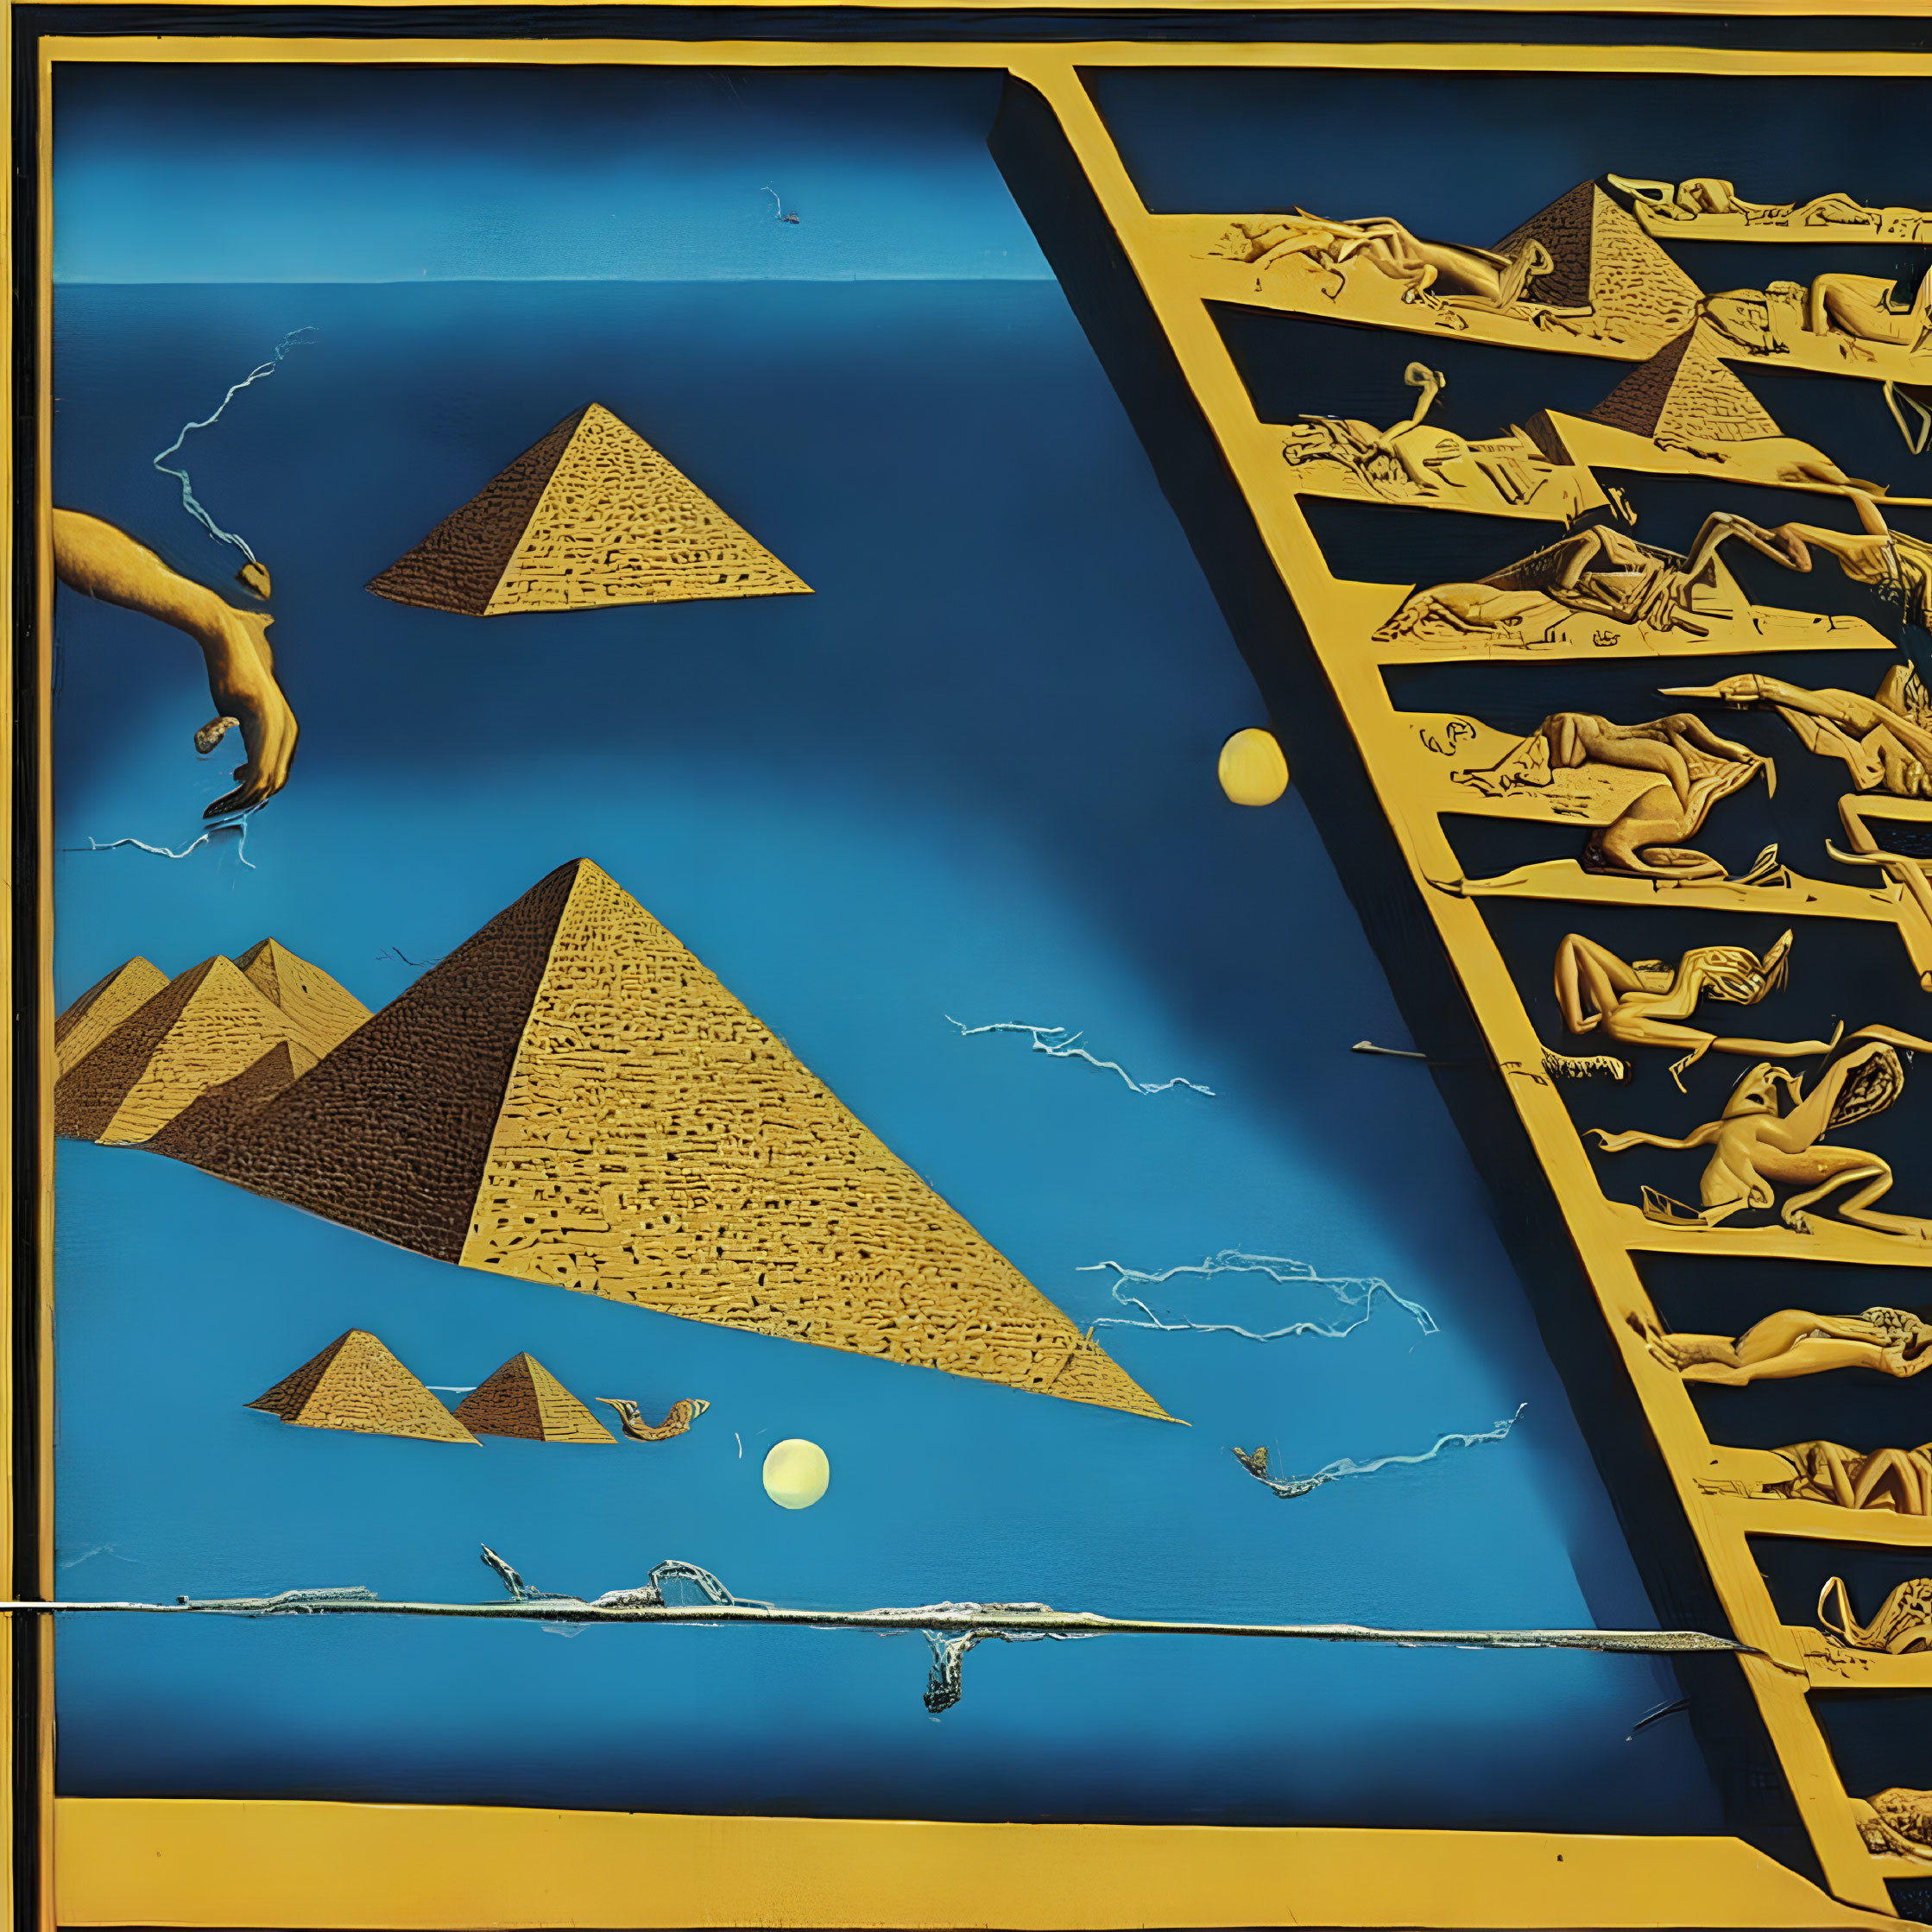 Surreal Egyptian pyramid art with human figures and celestial elements